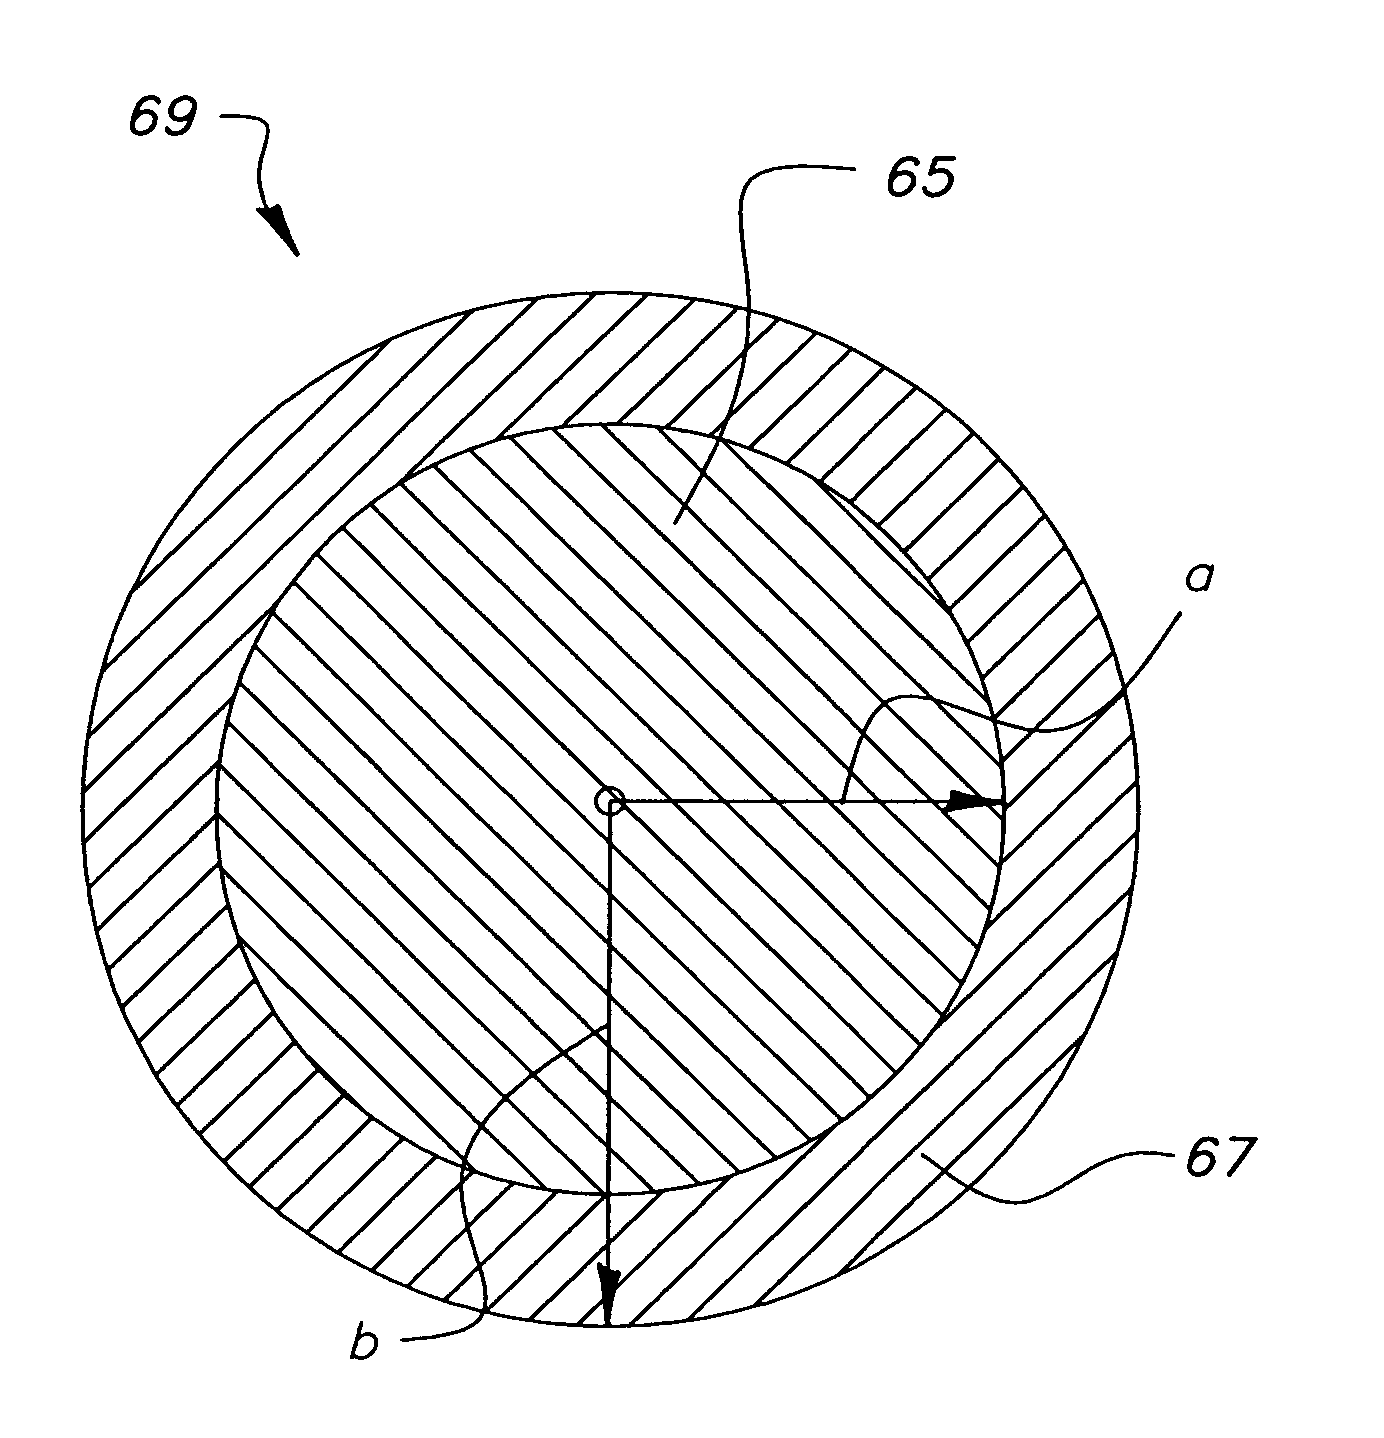 Method of manufacturing a polymethylmethacrylate core shell nanocomposite optical plastic article